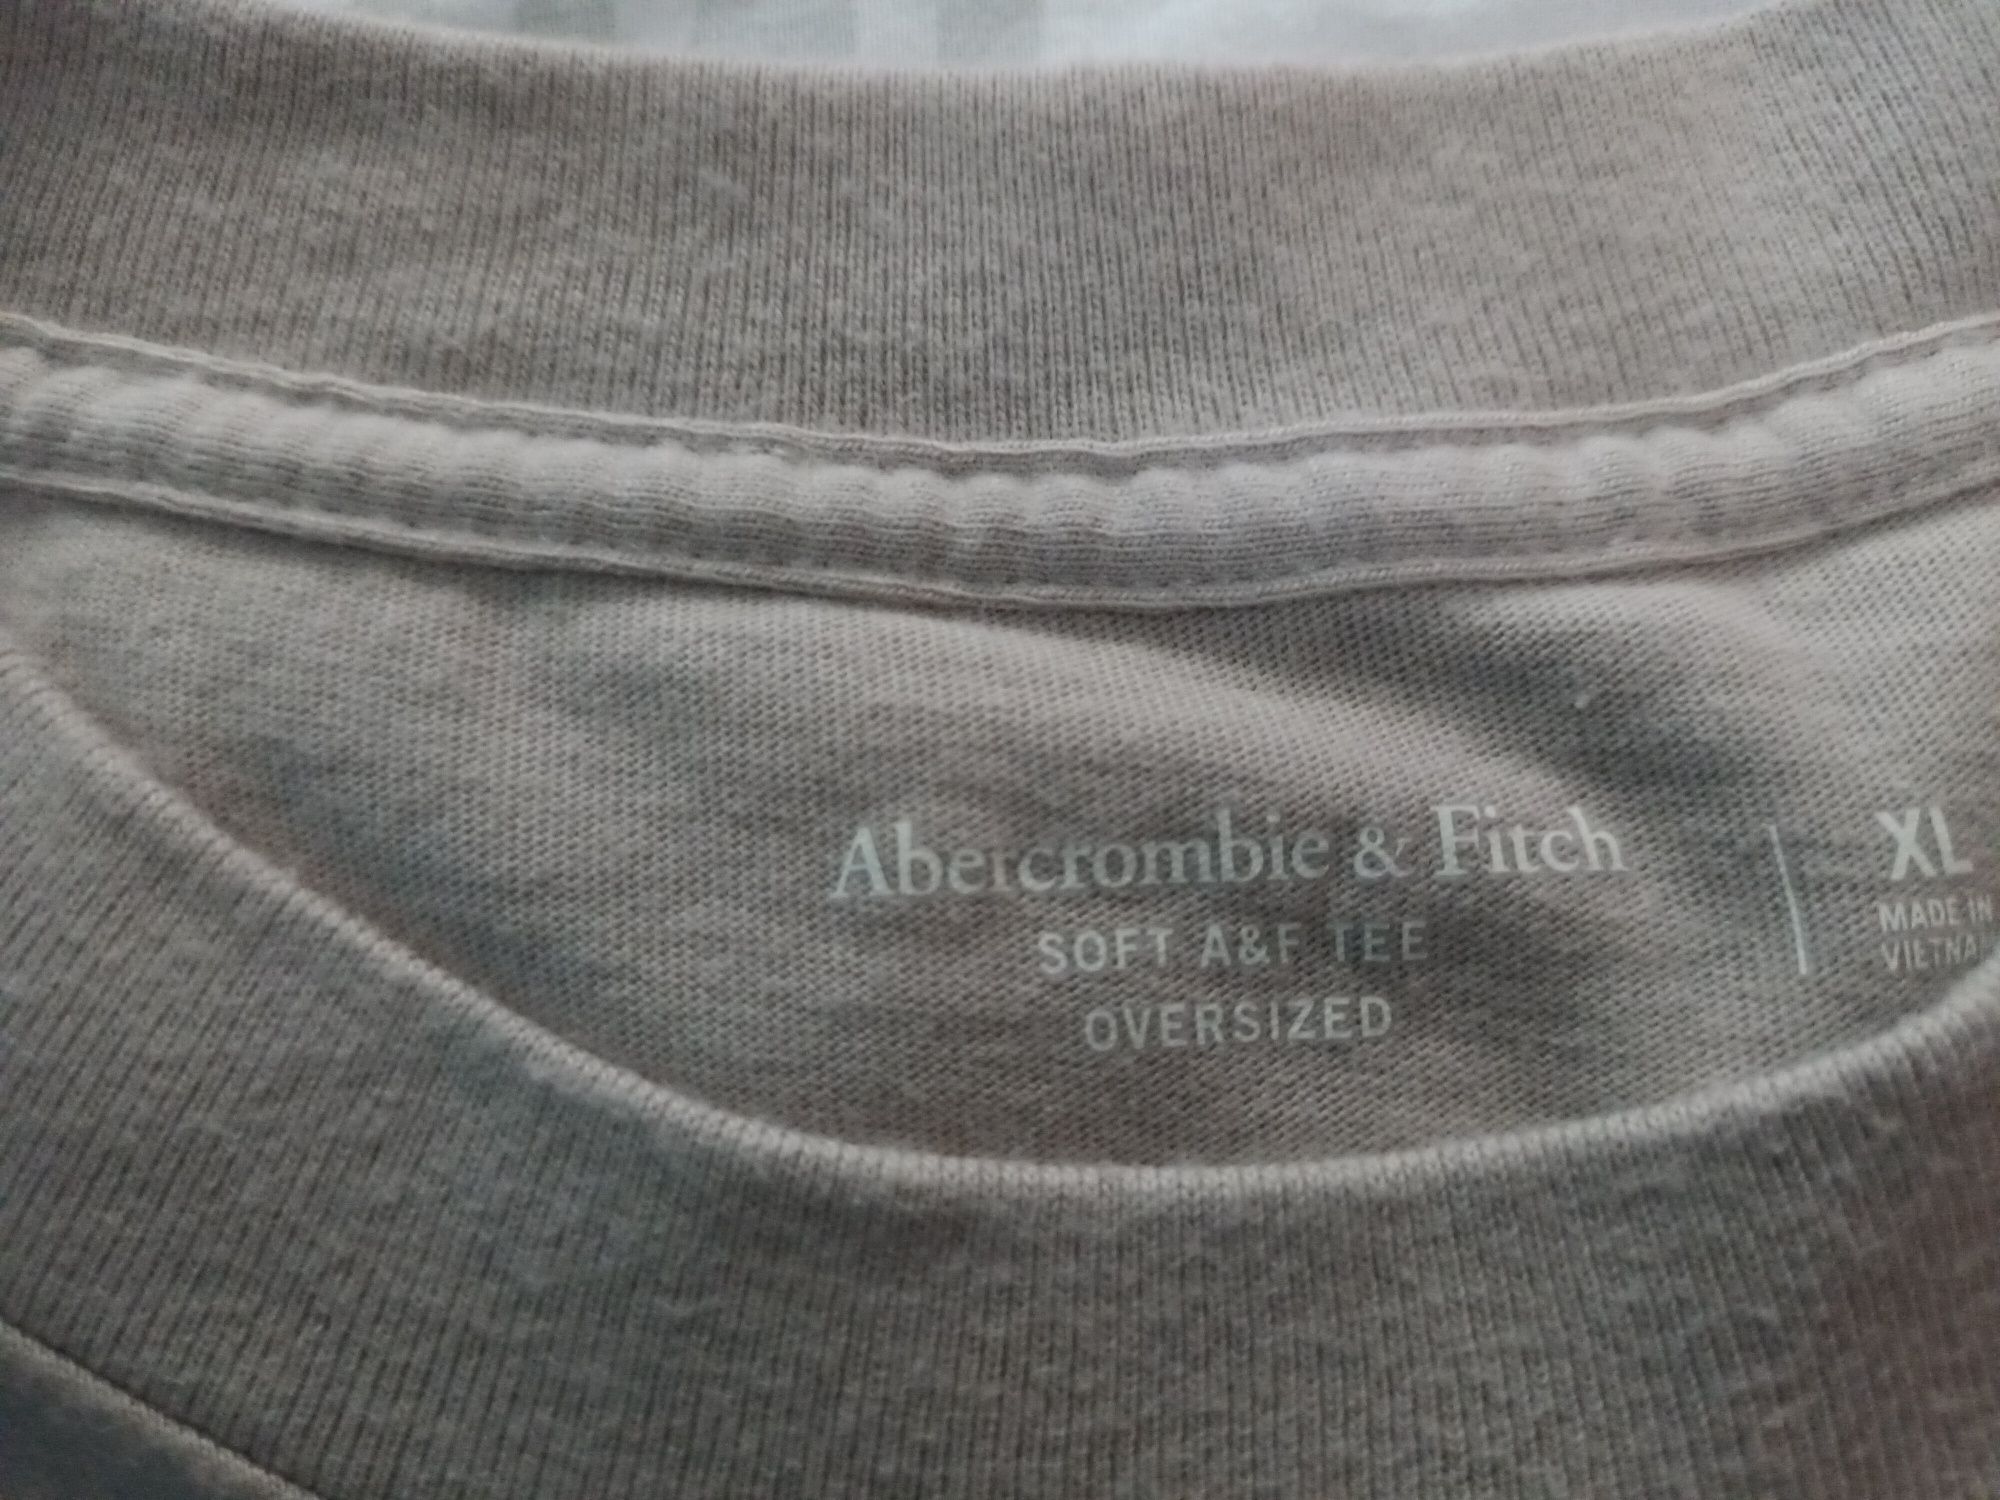 3 T'shirts Abercrombie & Fitch